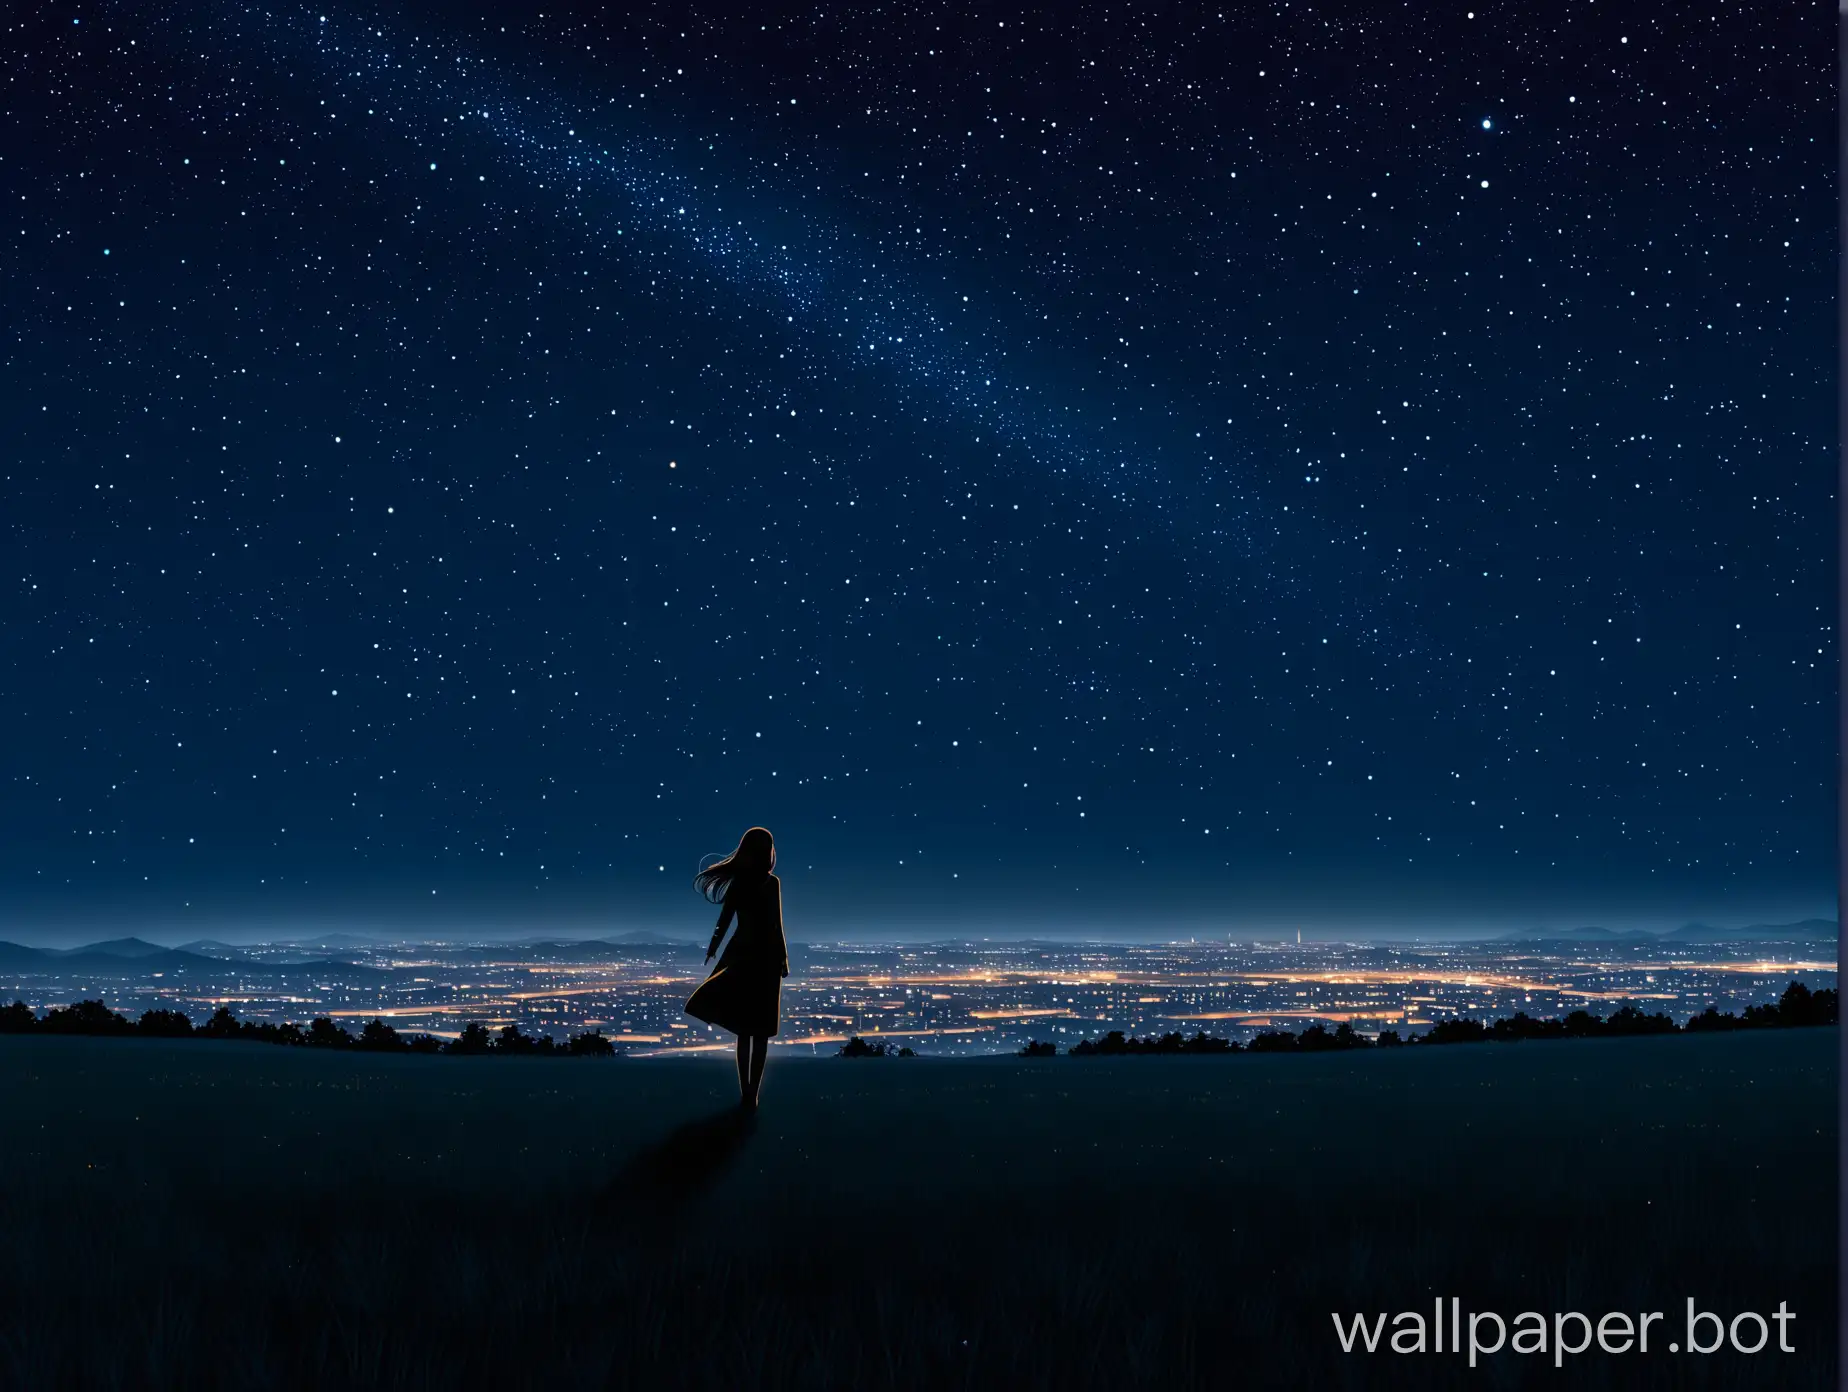 Starry-Night-Overlooking-Lit-City-Serene-Woman-in-Silhouette